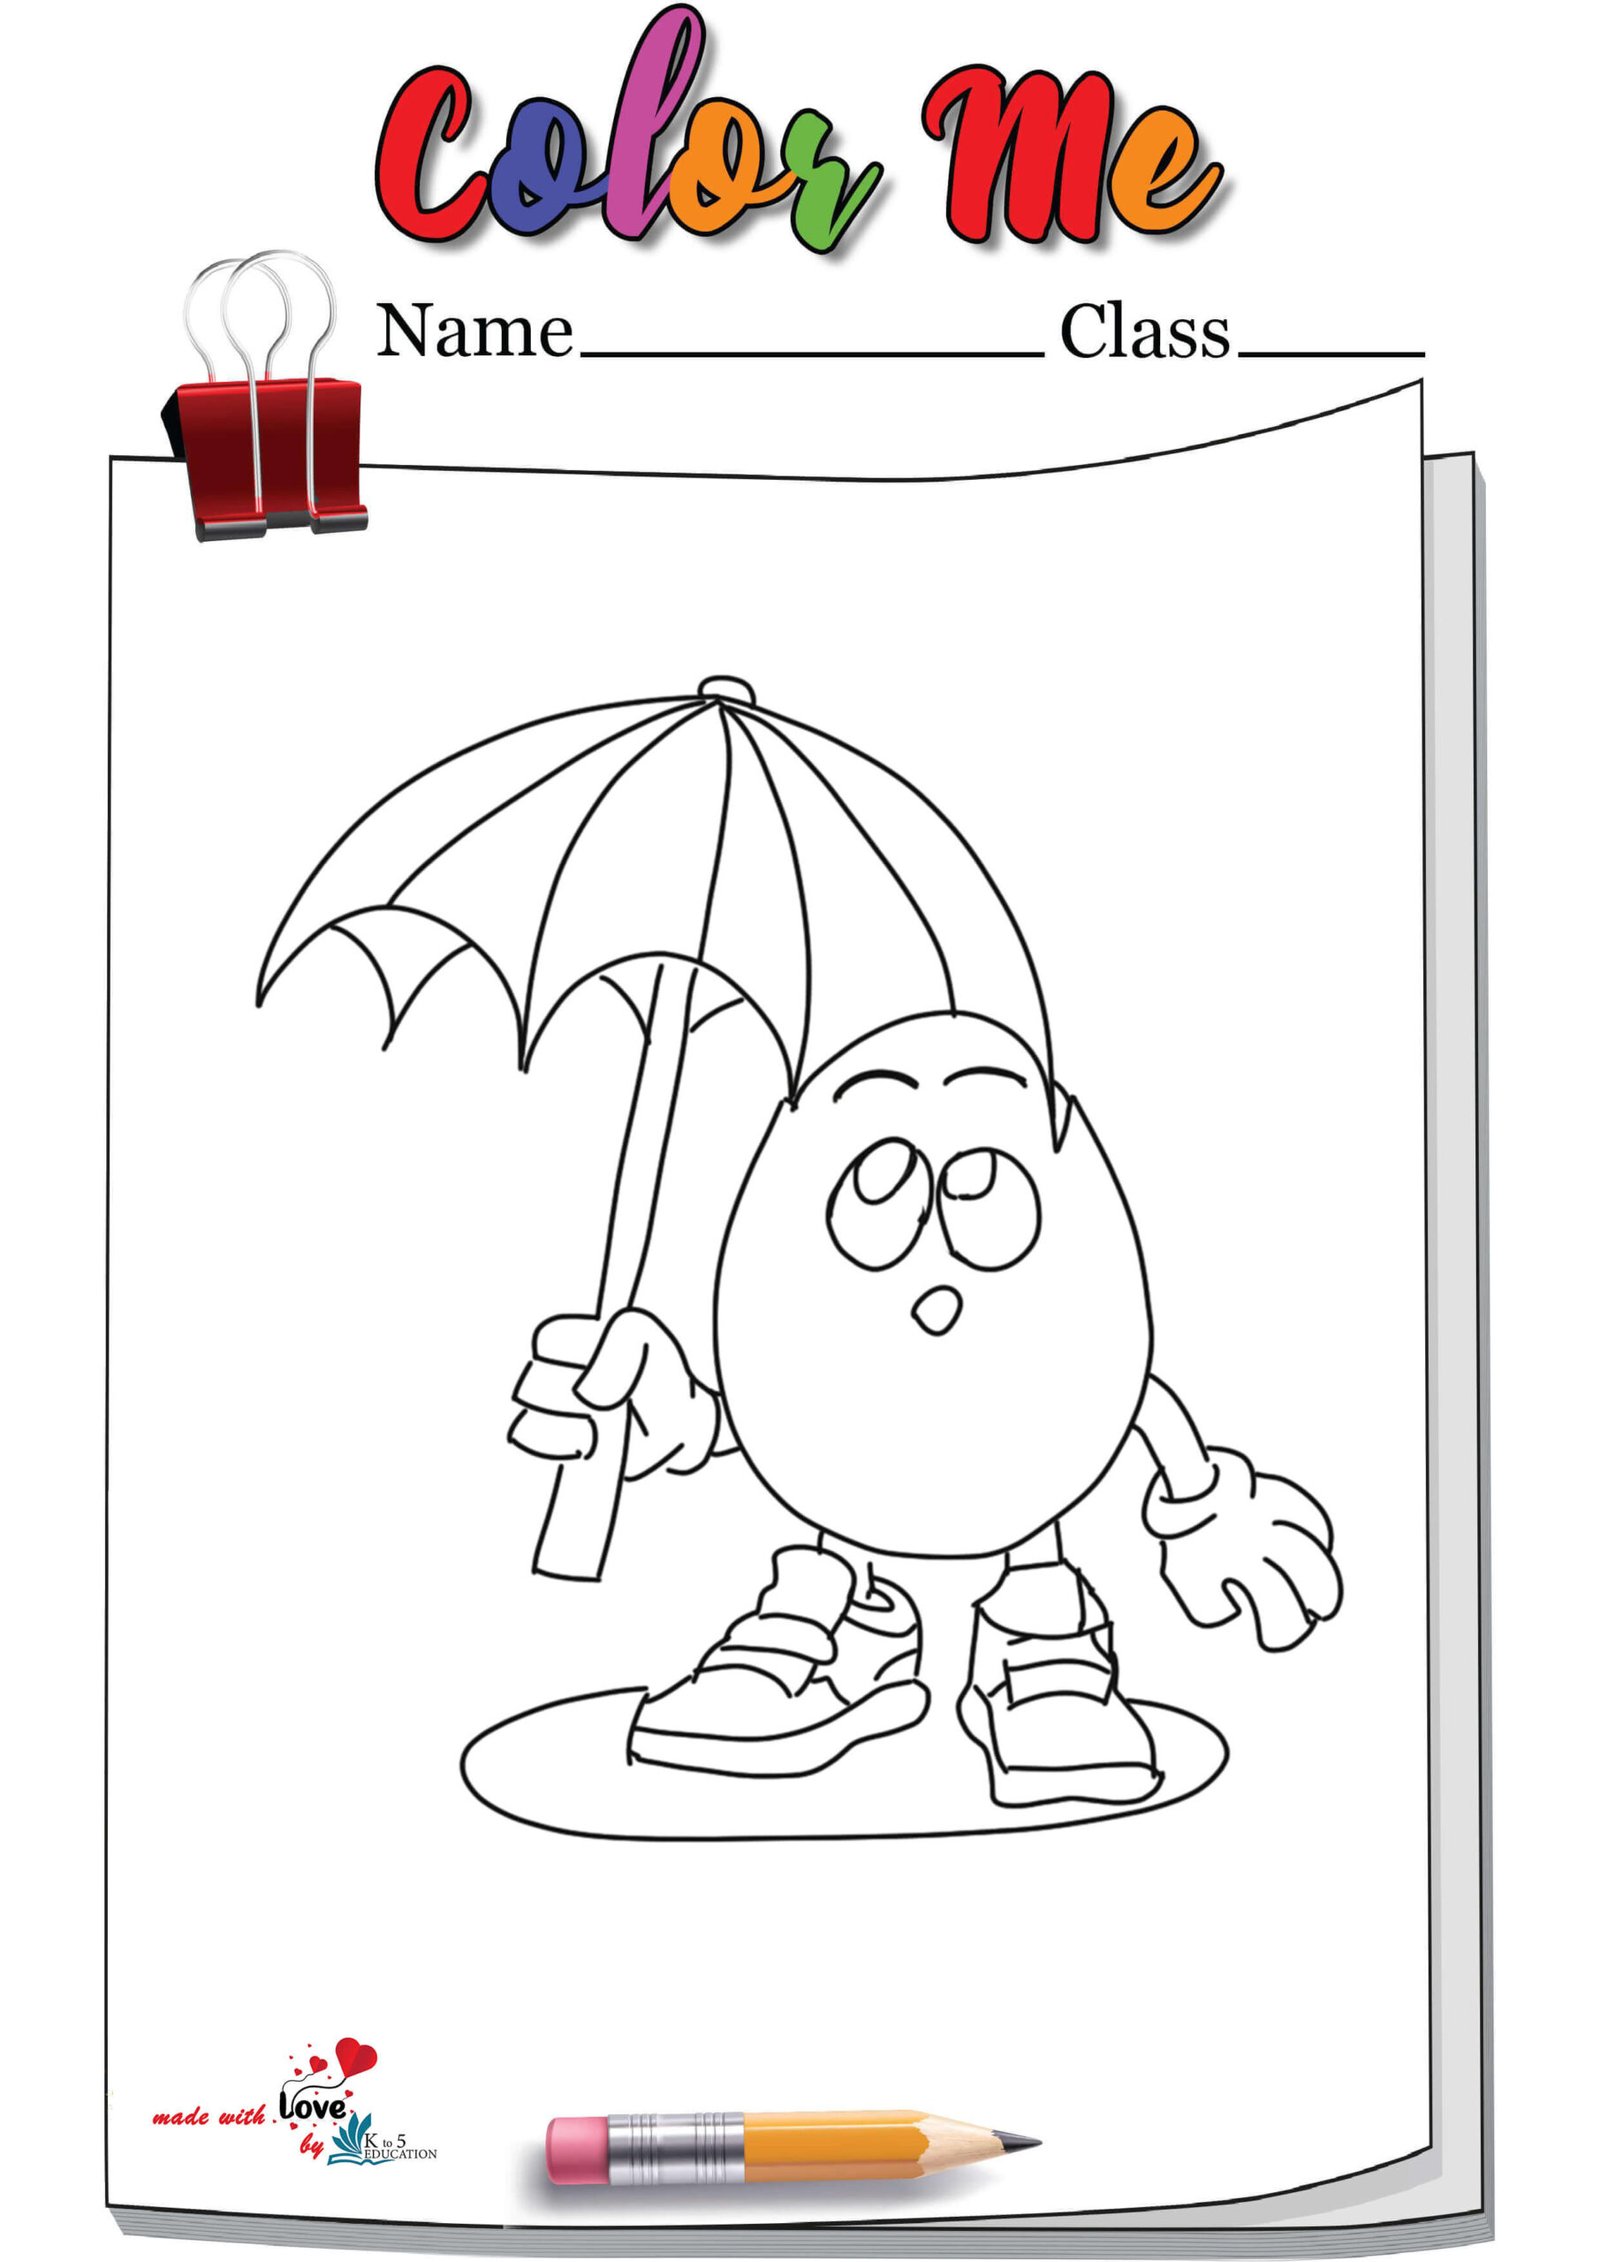 Cartoon Character With Umbrella Coloring Page